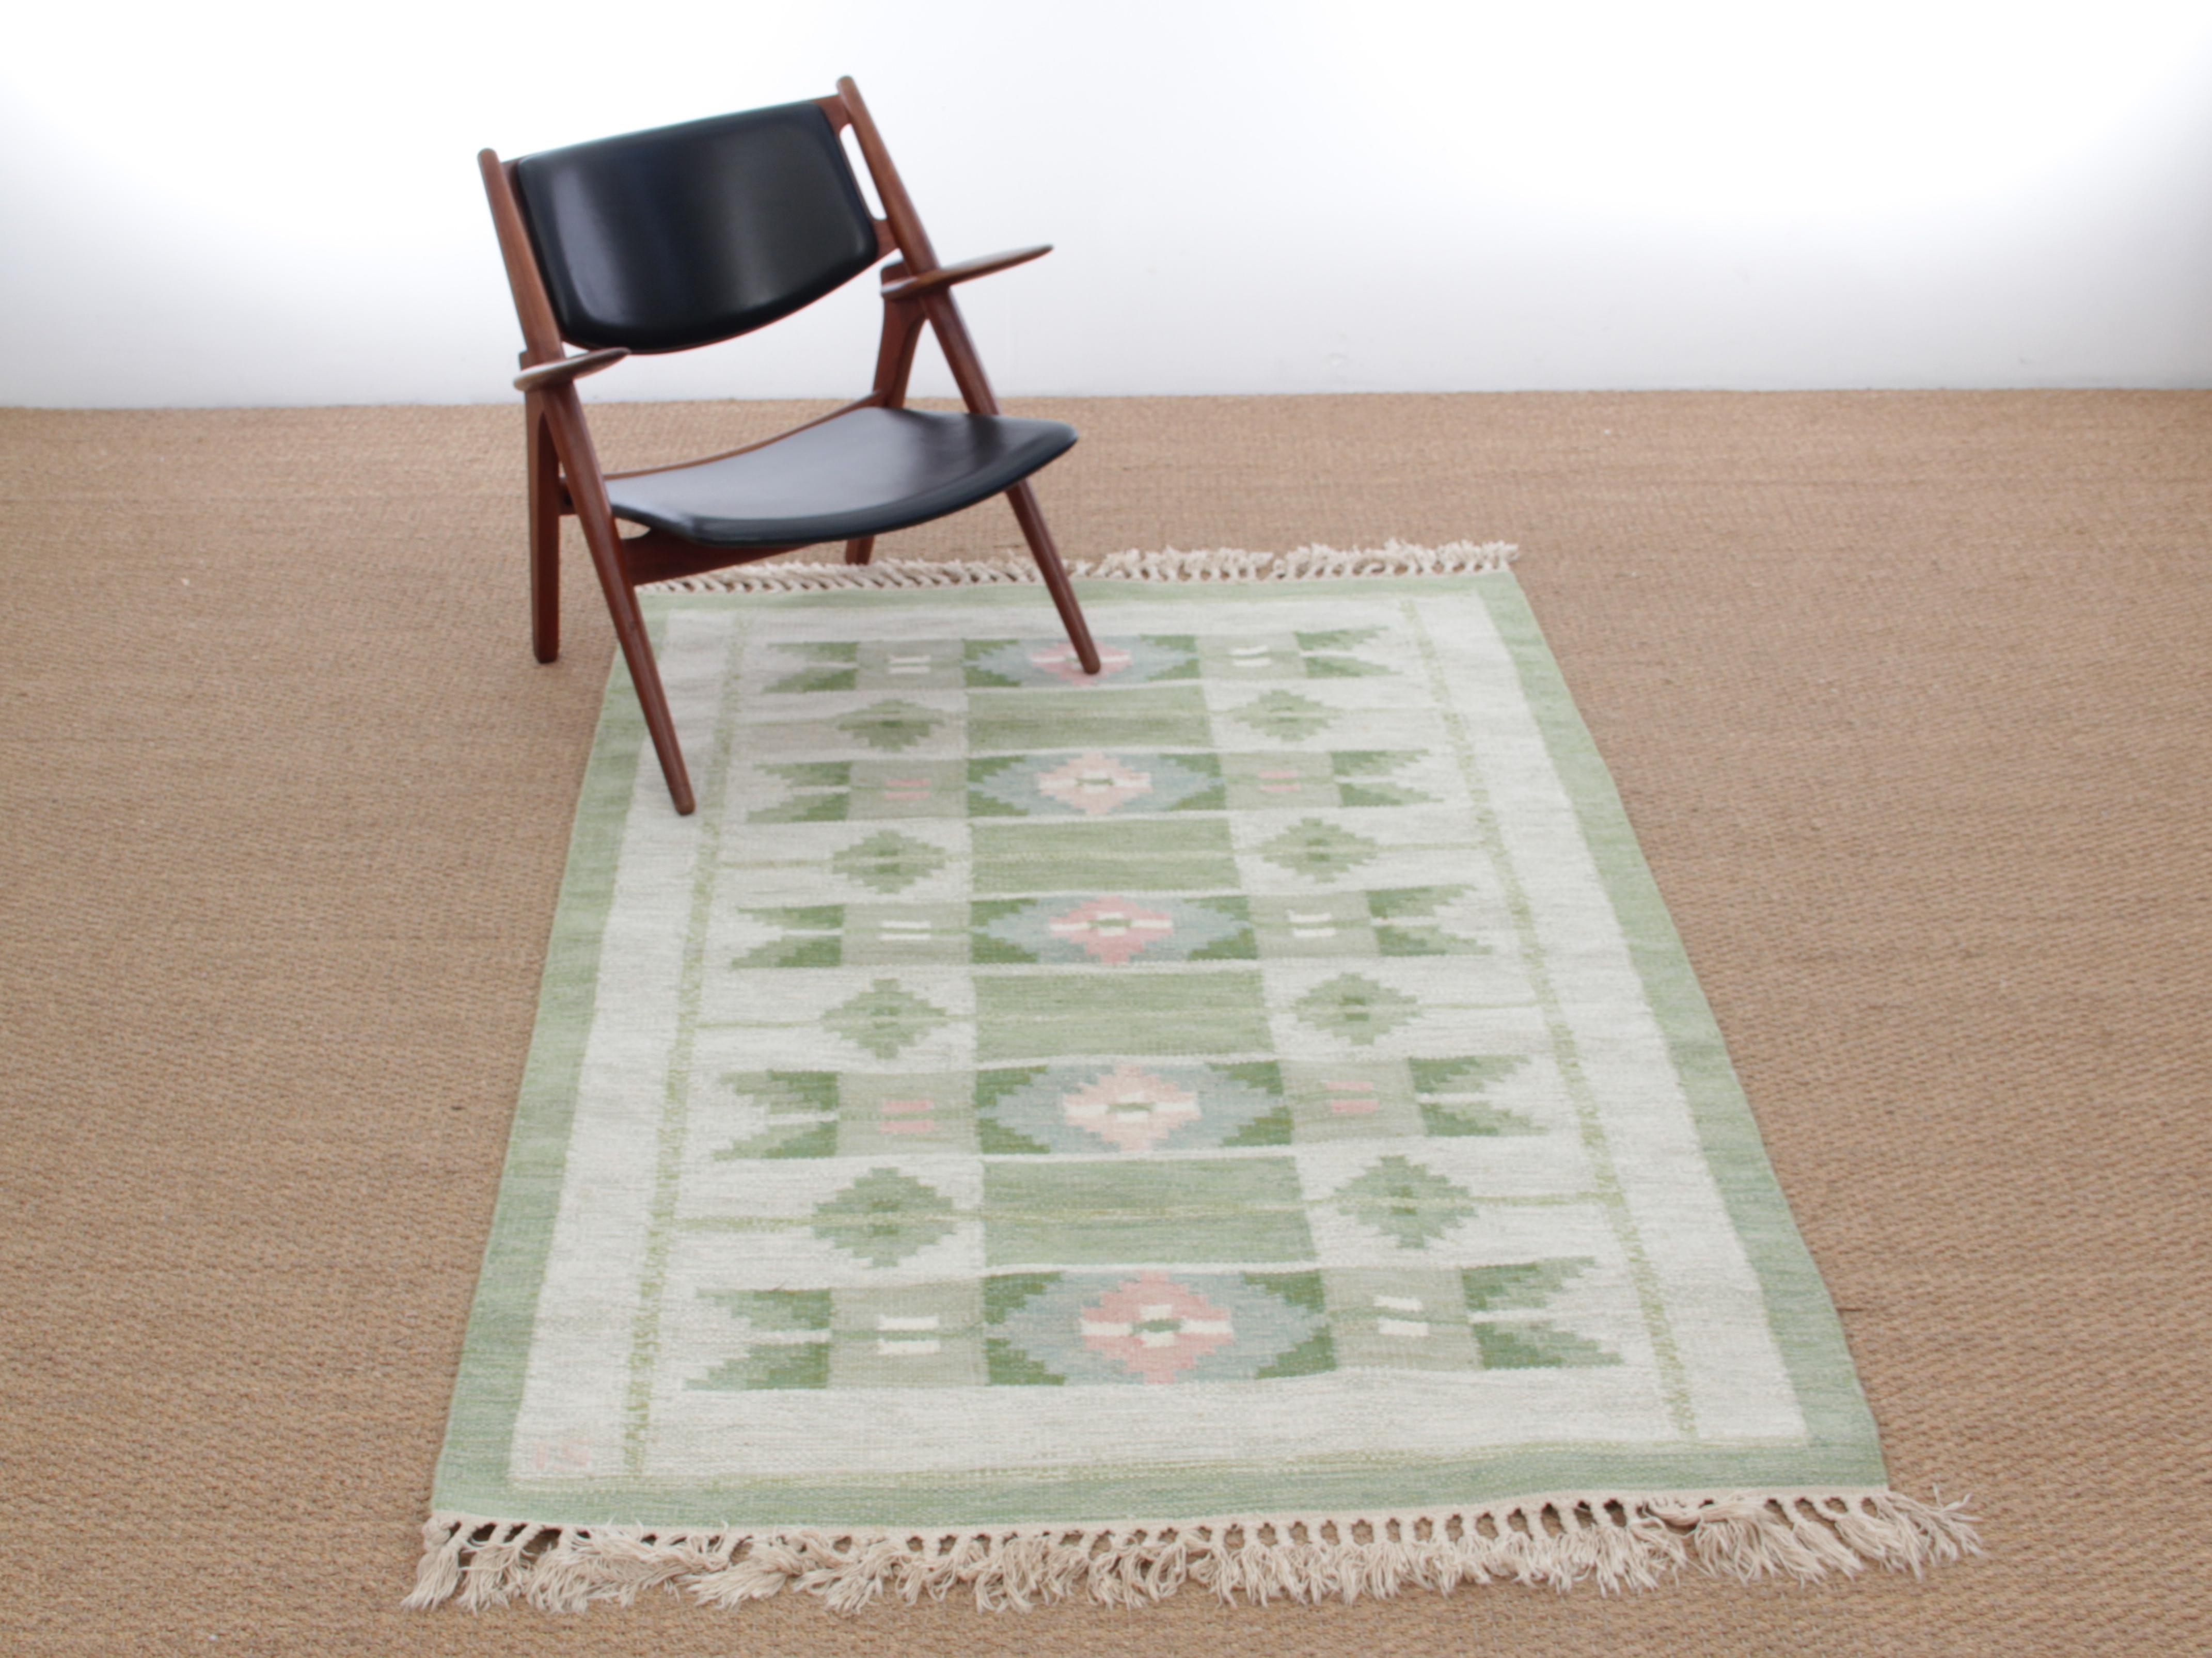 Swedish Rolakan carpet handwoven wool. Geometric patterns. Signed with monograms IS. 200 x 140 cm.

Measures: Width 166 cm, diameter 92 cm, thick 0.8 cm.